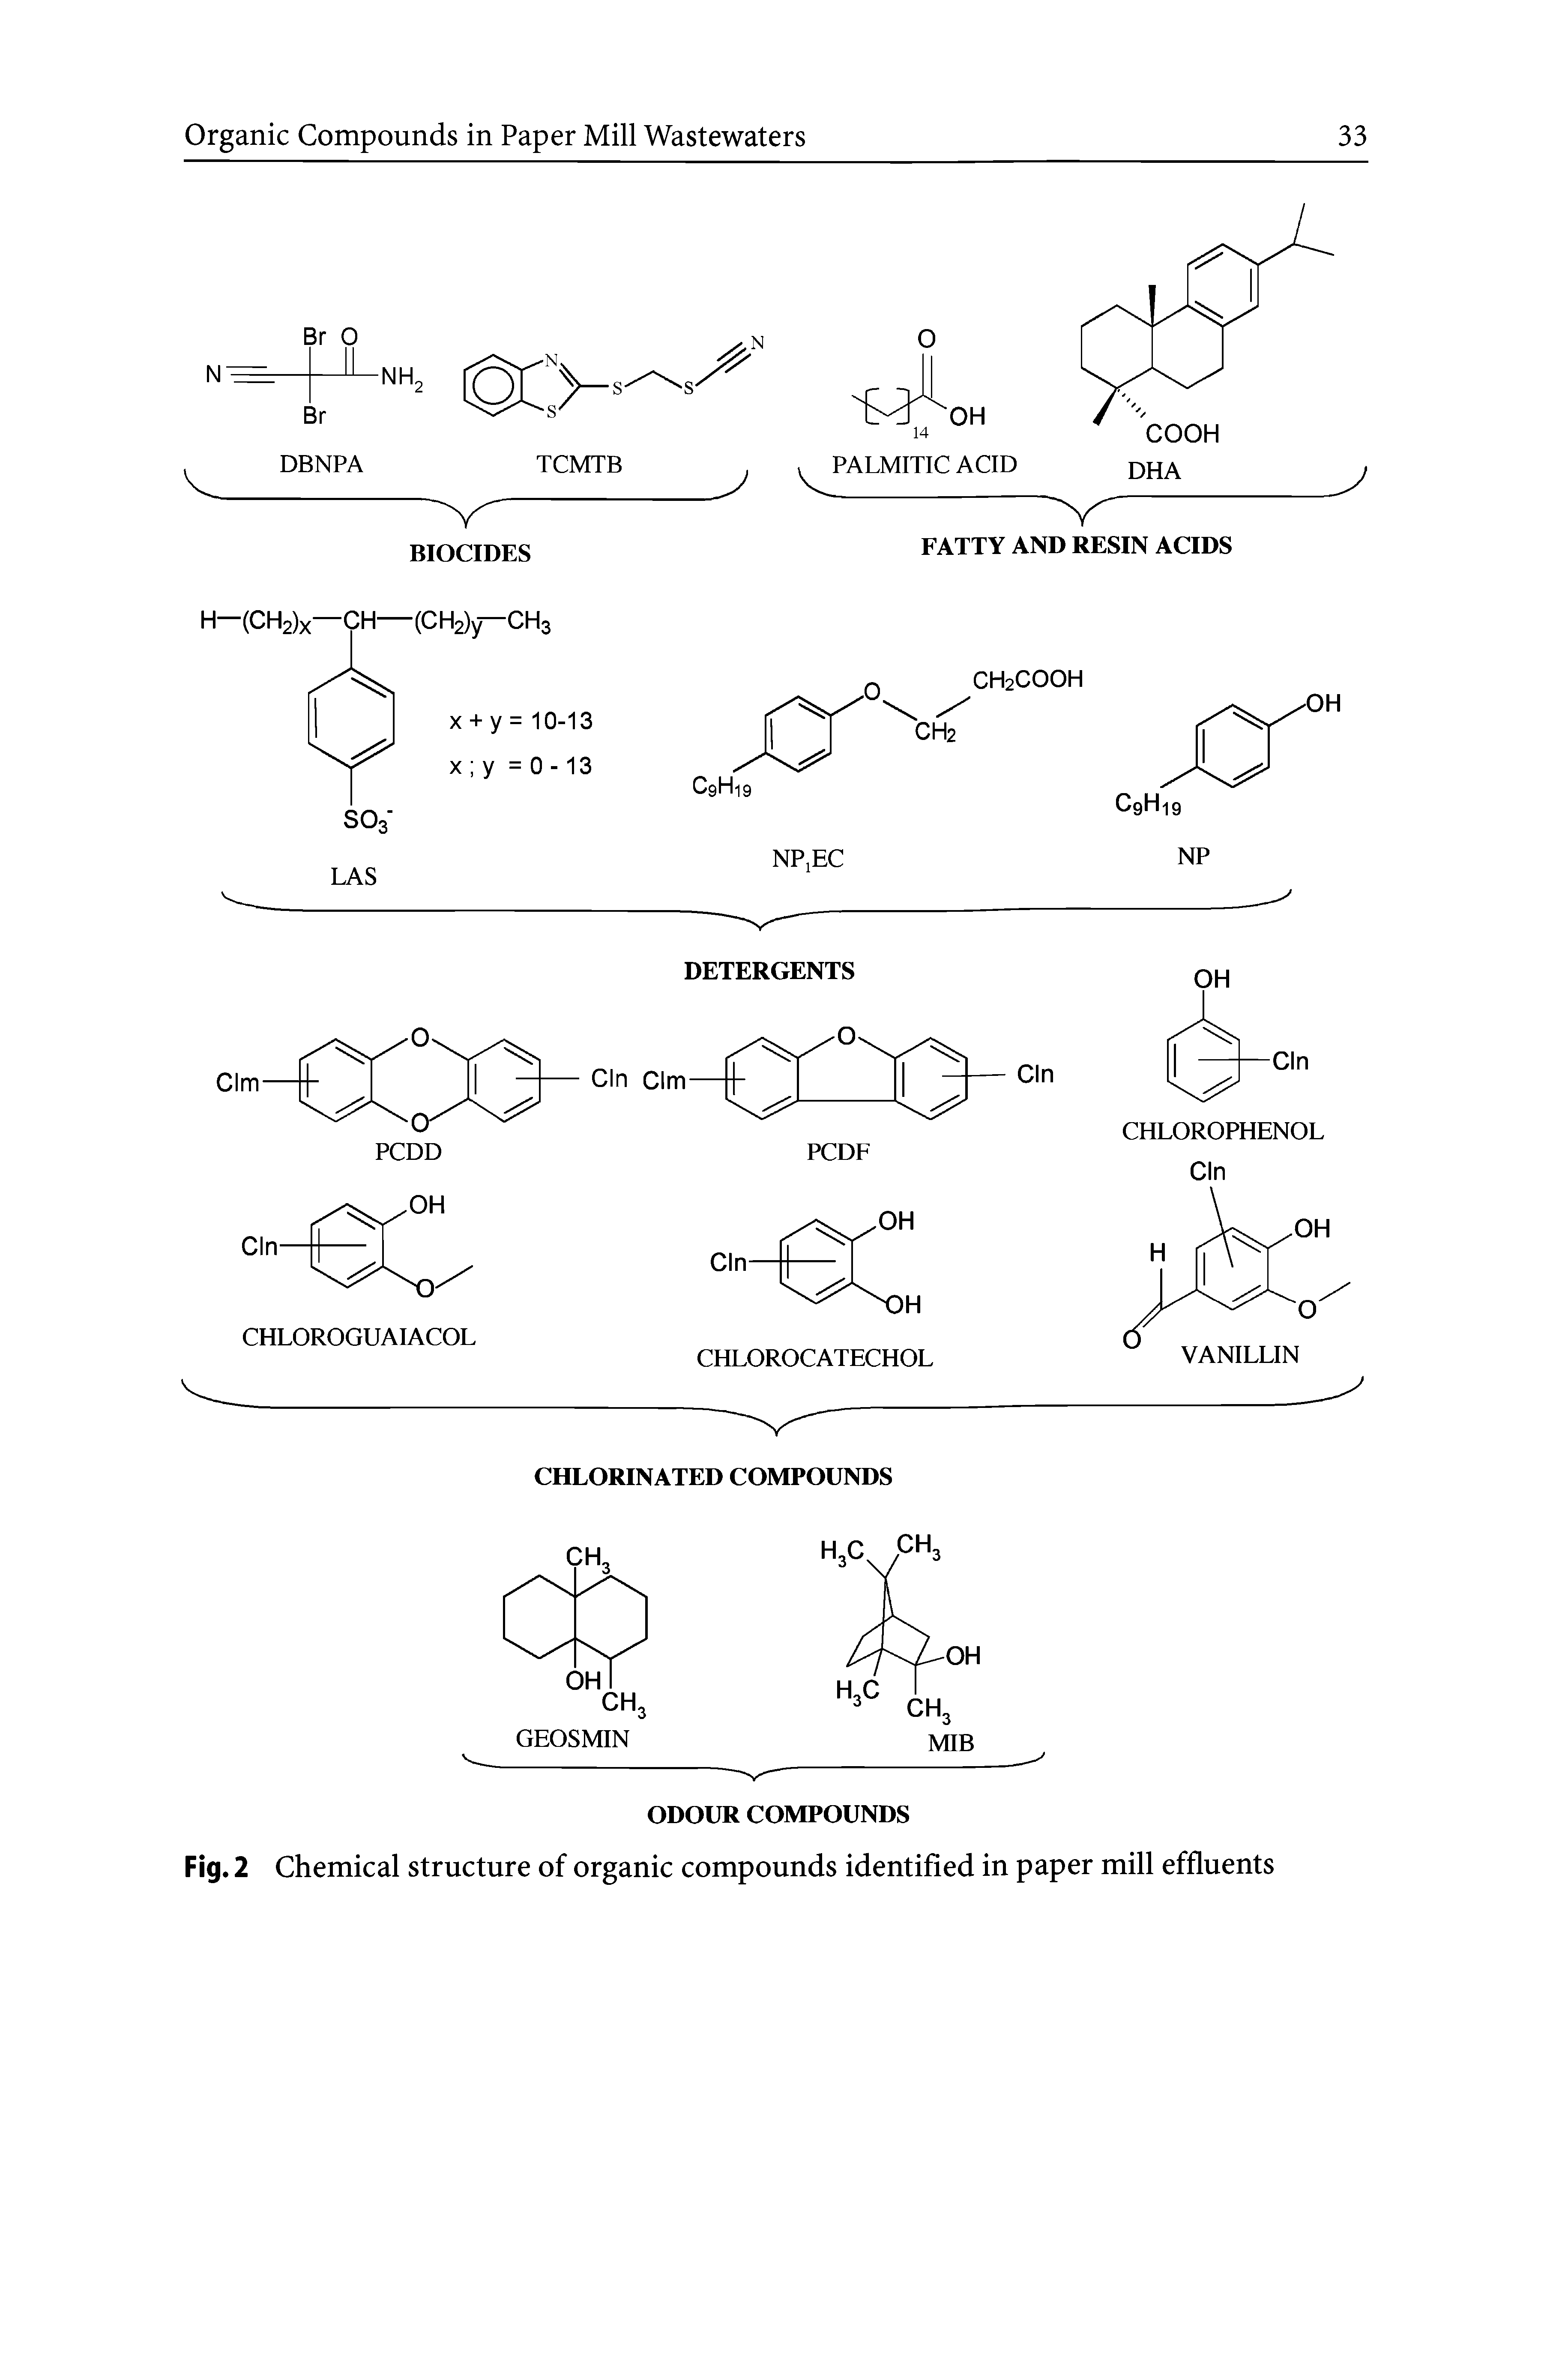 Fig. 2 Chemical structure of organic compounds identified in paper mill effluents...